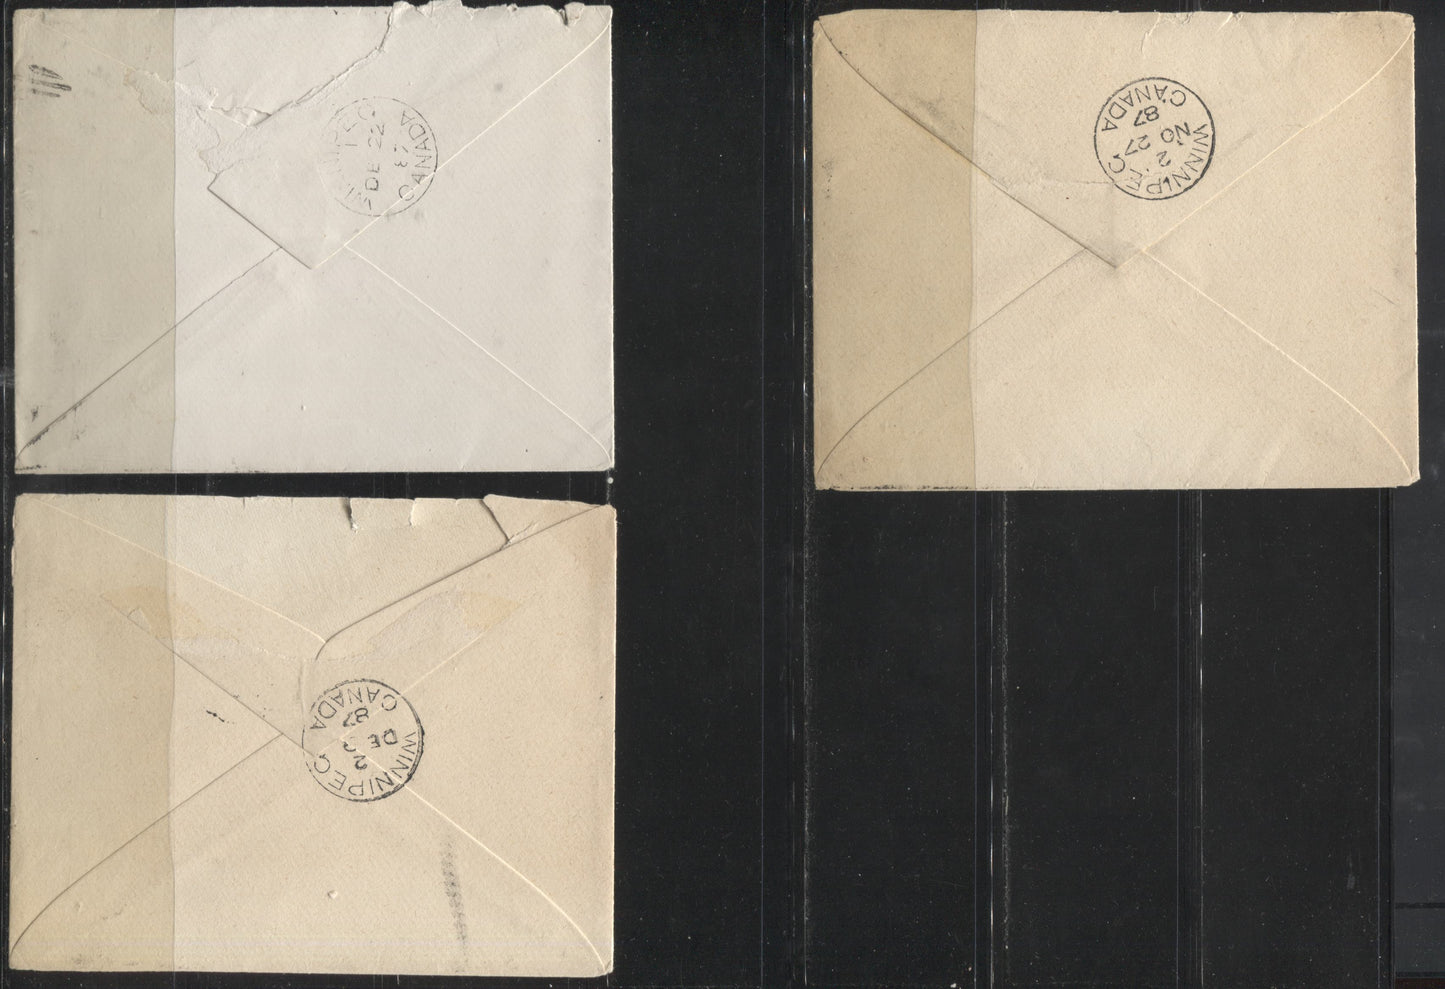 Lot 223 Canada #37 3c  Queen Victoria, 1870-1897 Small Queen Issue, Three VG-F Single Franking Covers Sent to the Same Recipient in 1887